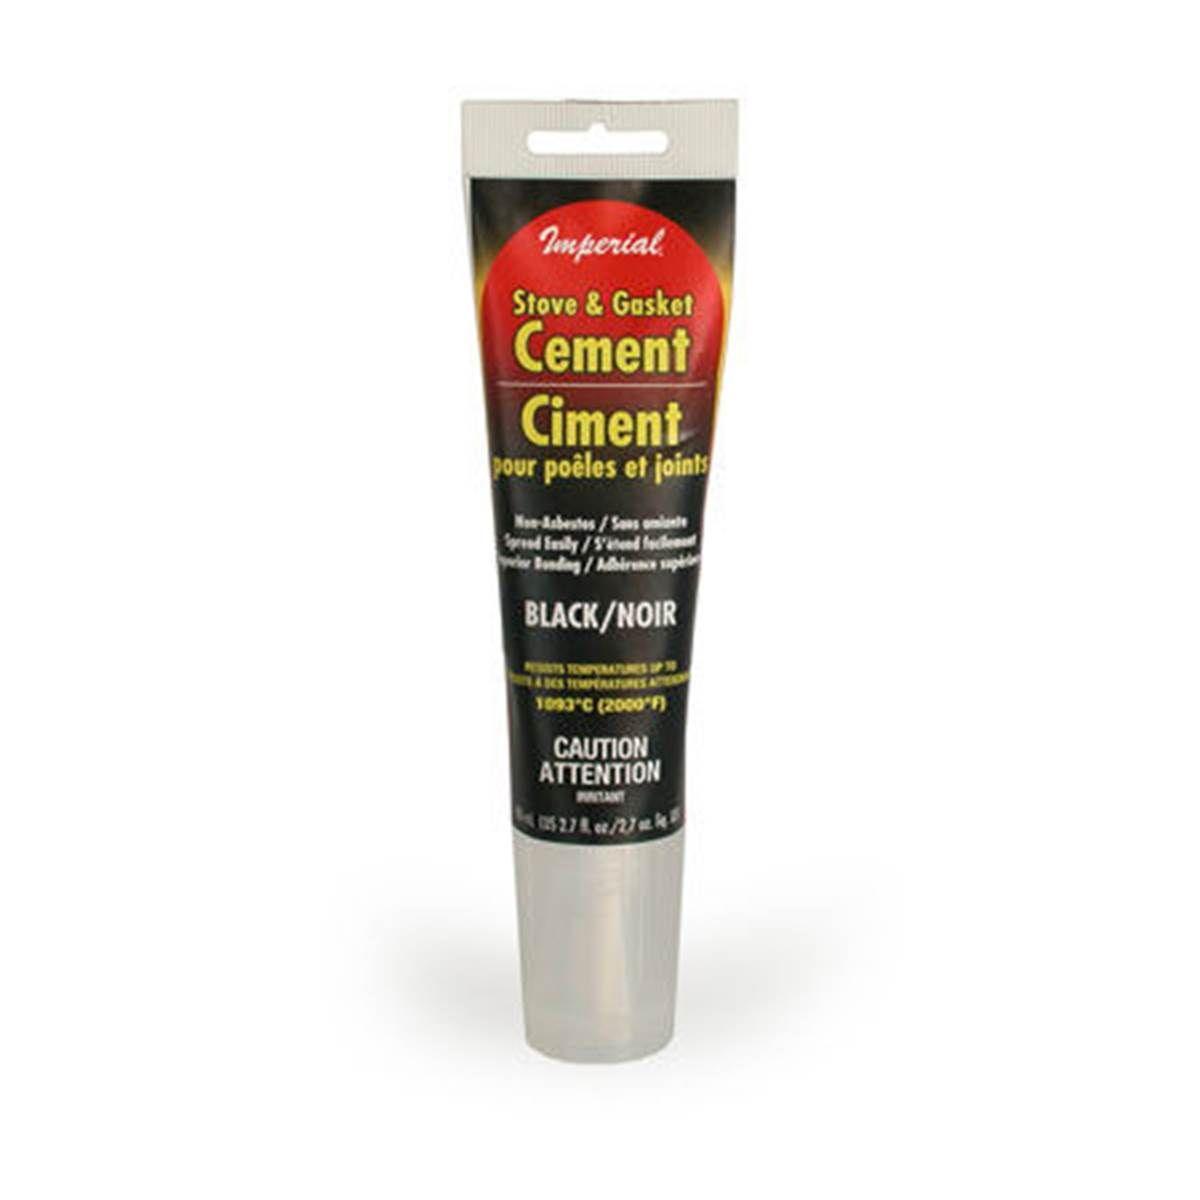 Imperial KK0075-A Gasket Cement, 2.7 Oz - Tube - Woodstove Fireplace Glass